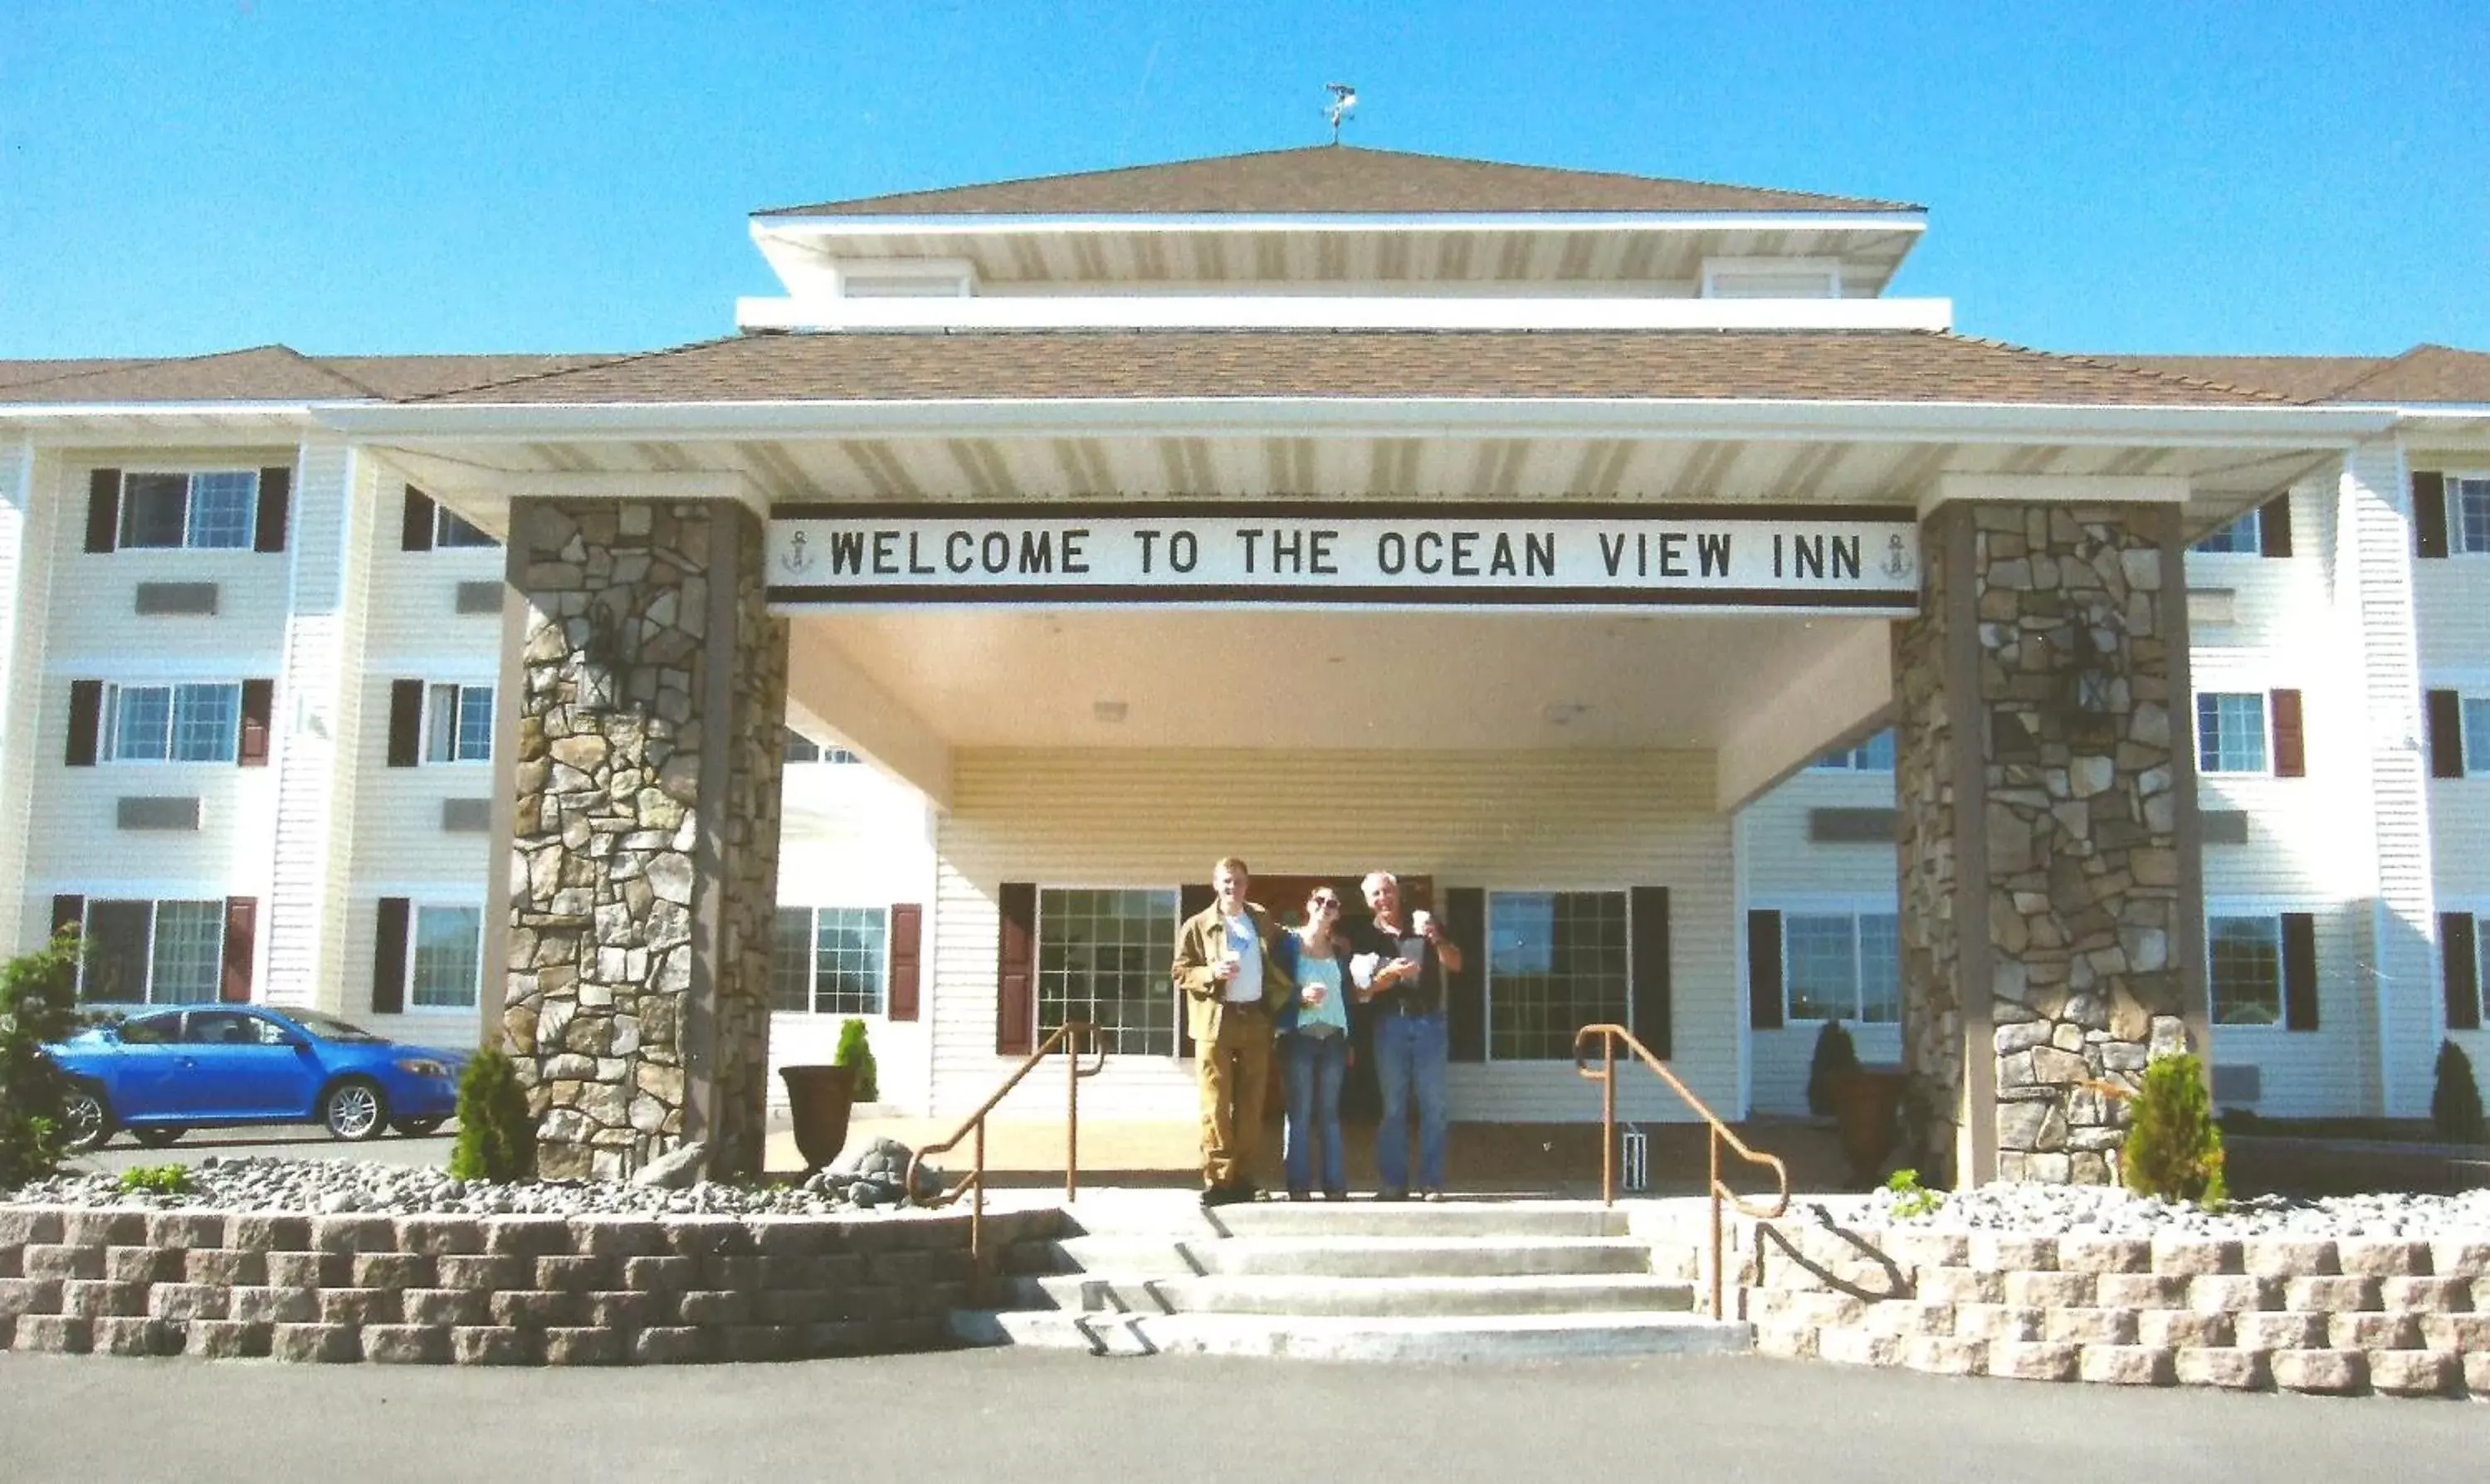 Property building, Facade/Entrance in Oceanview Inn and Suites